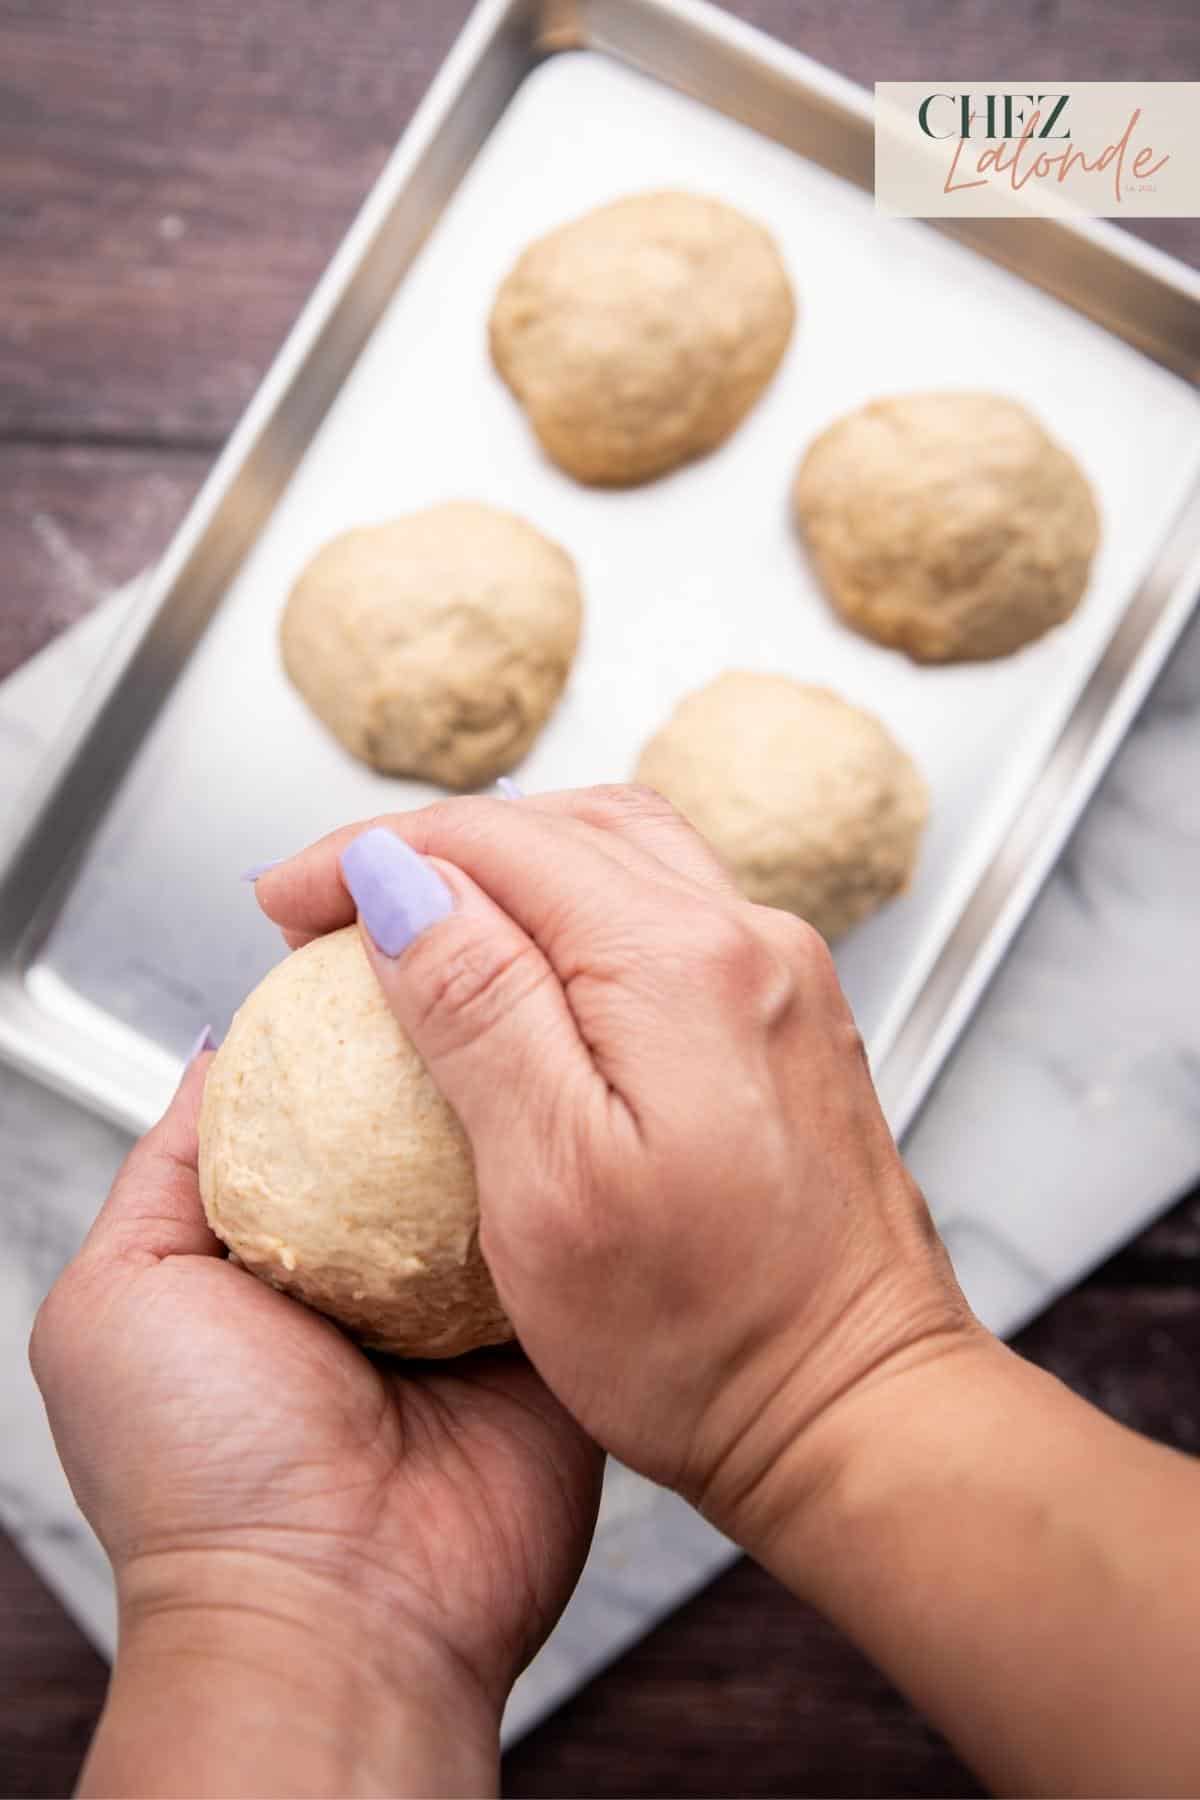 Based on the desired pita size, size the dough accordingly and form small dough balls using your hands.